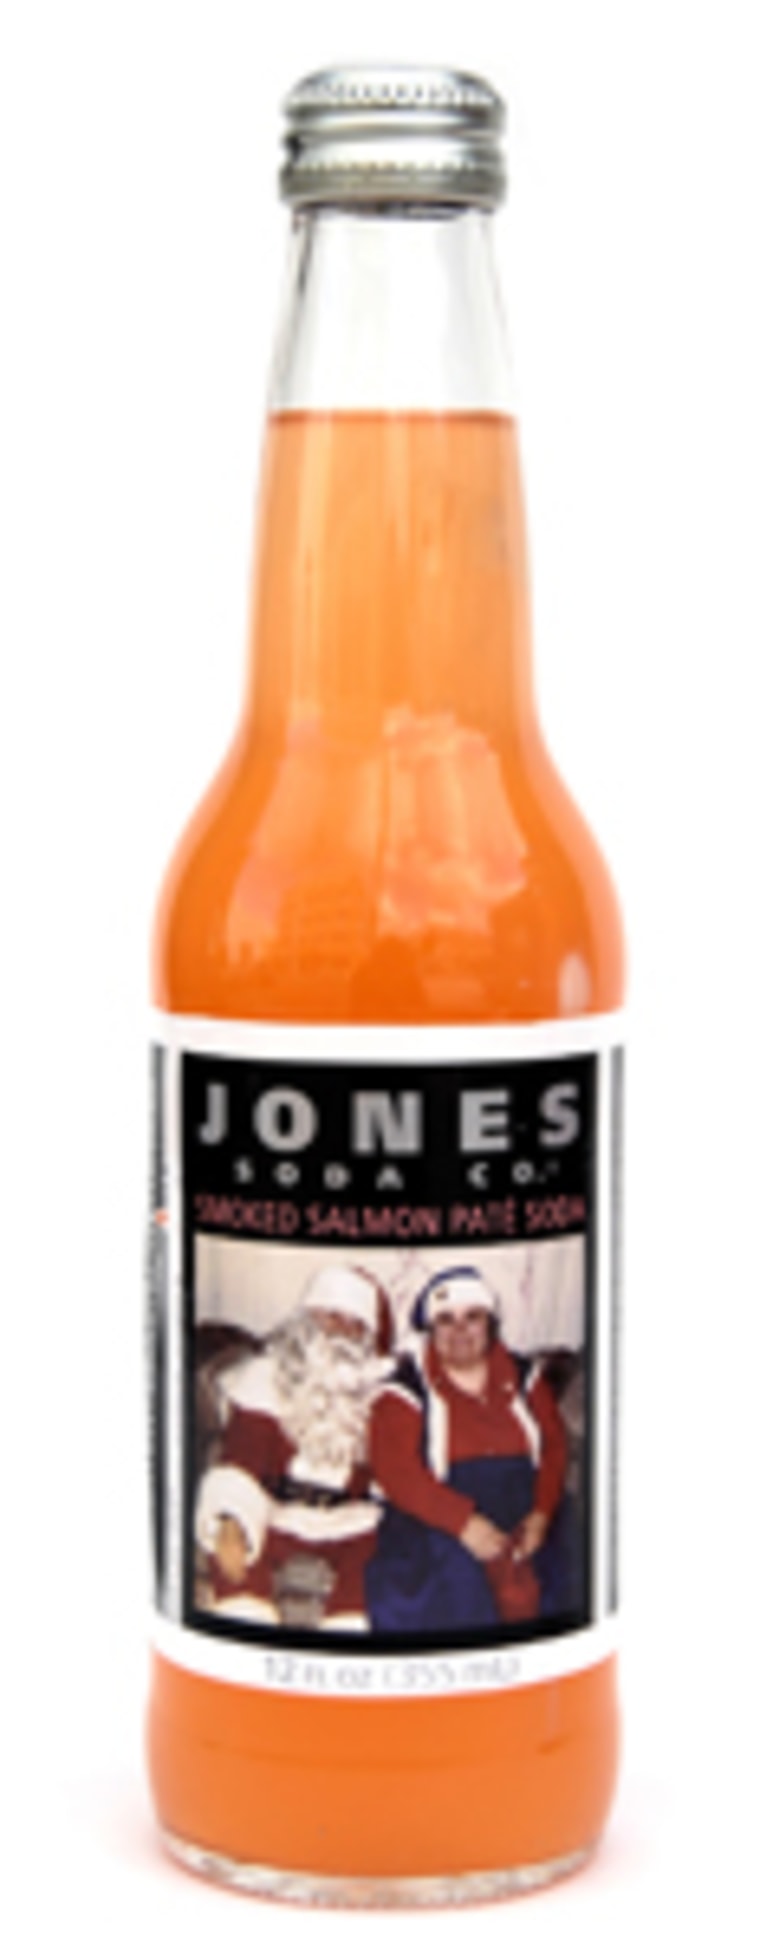 “When you smell it, it’s got that smoked salmon aroma,” says Jones Soda CEO Peter van Stolk of his company's newest flavor.